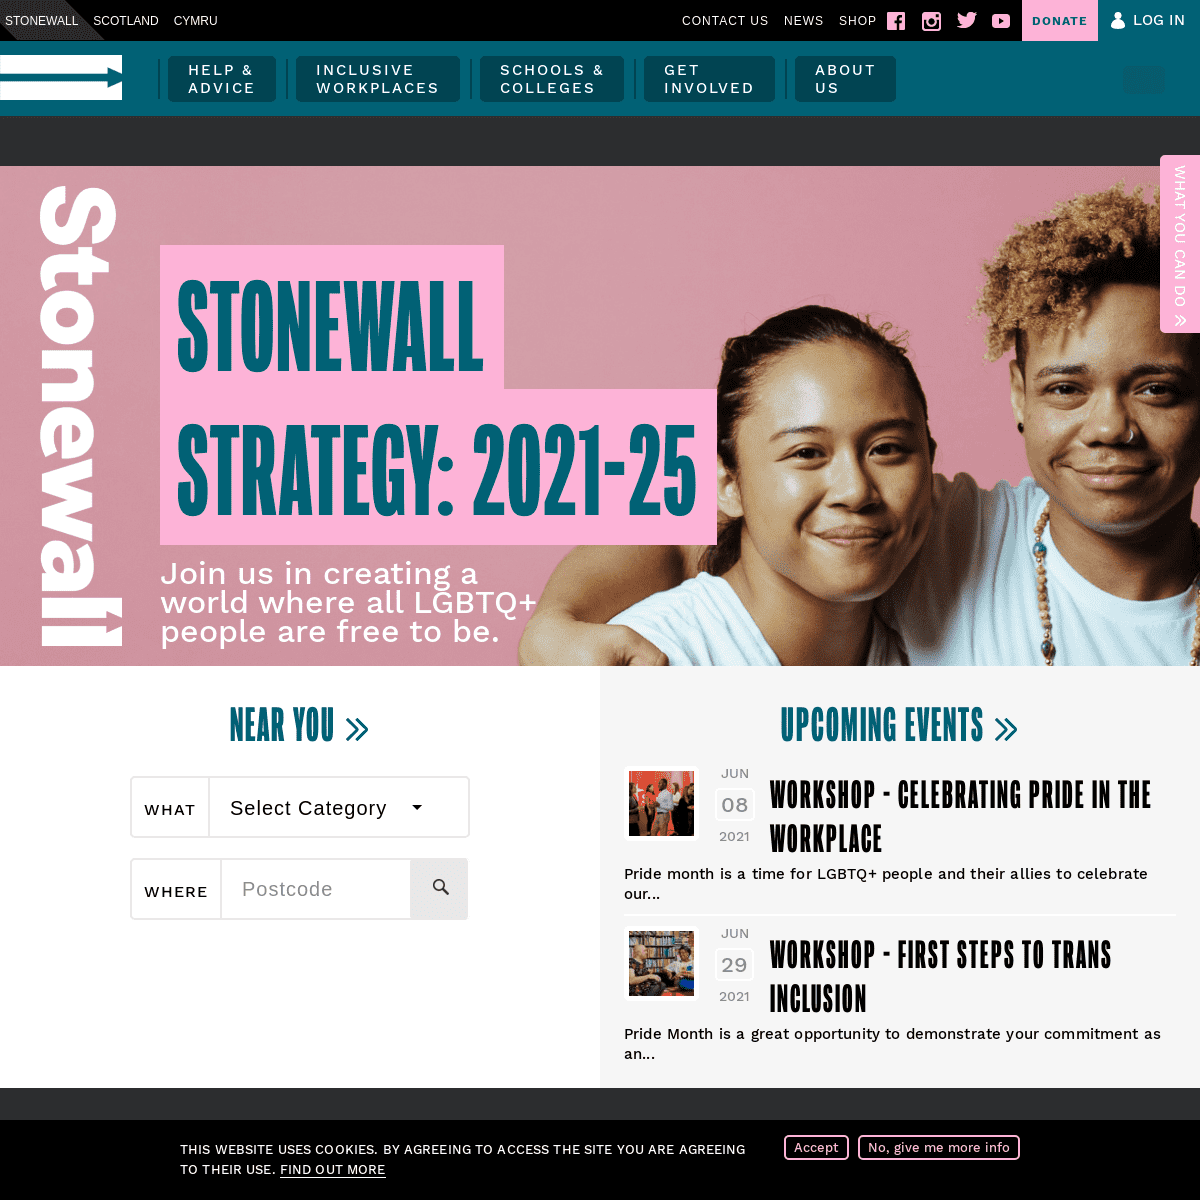 A complete backup of https://stonewall.org.uk